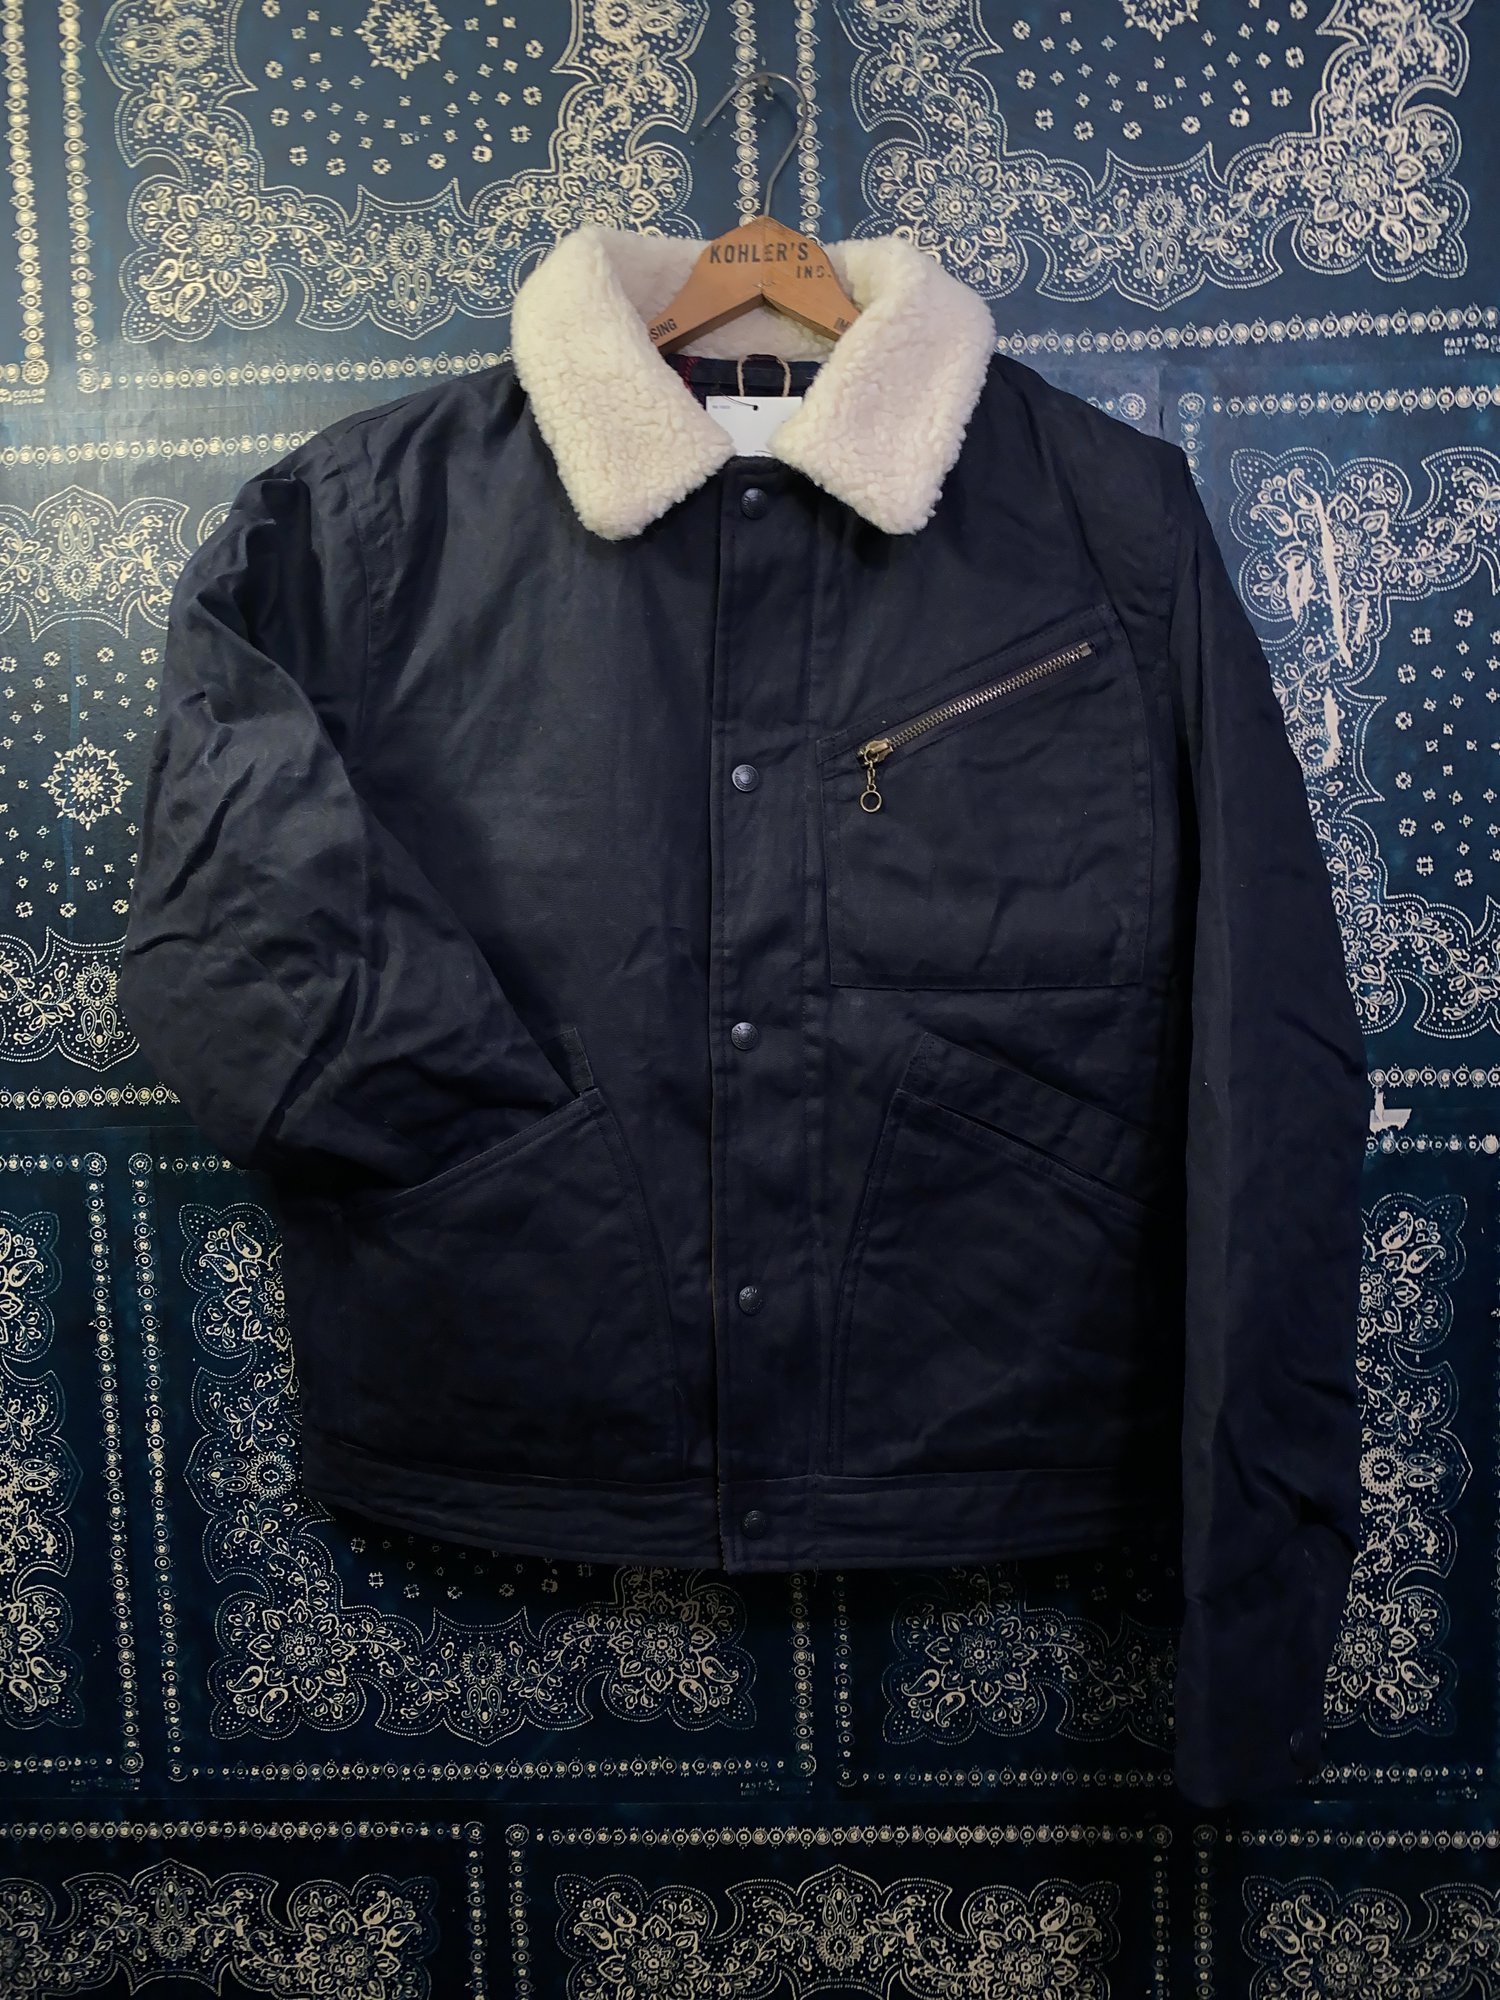 Rancher Jacket - Waxed Cotton - Navy - Flannel Lined — Mello and Sons